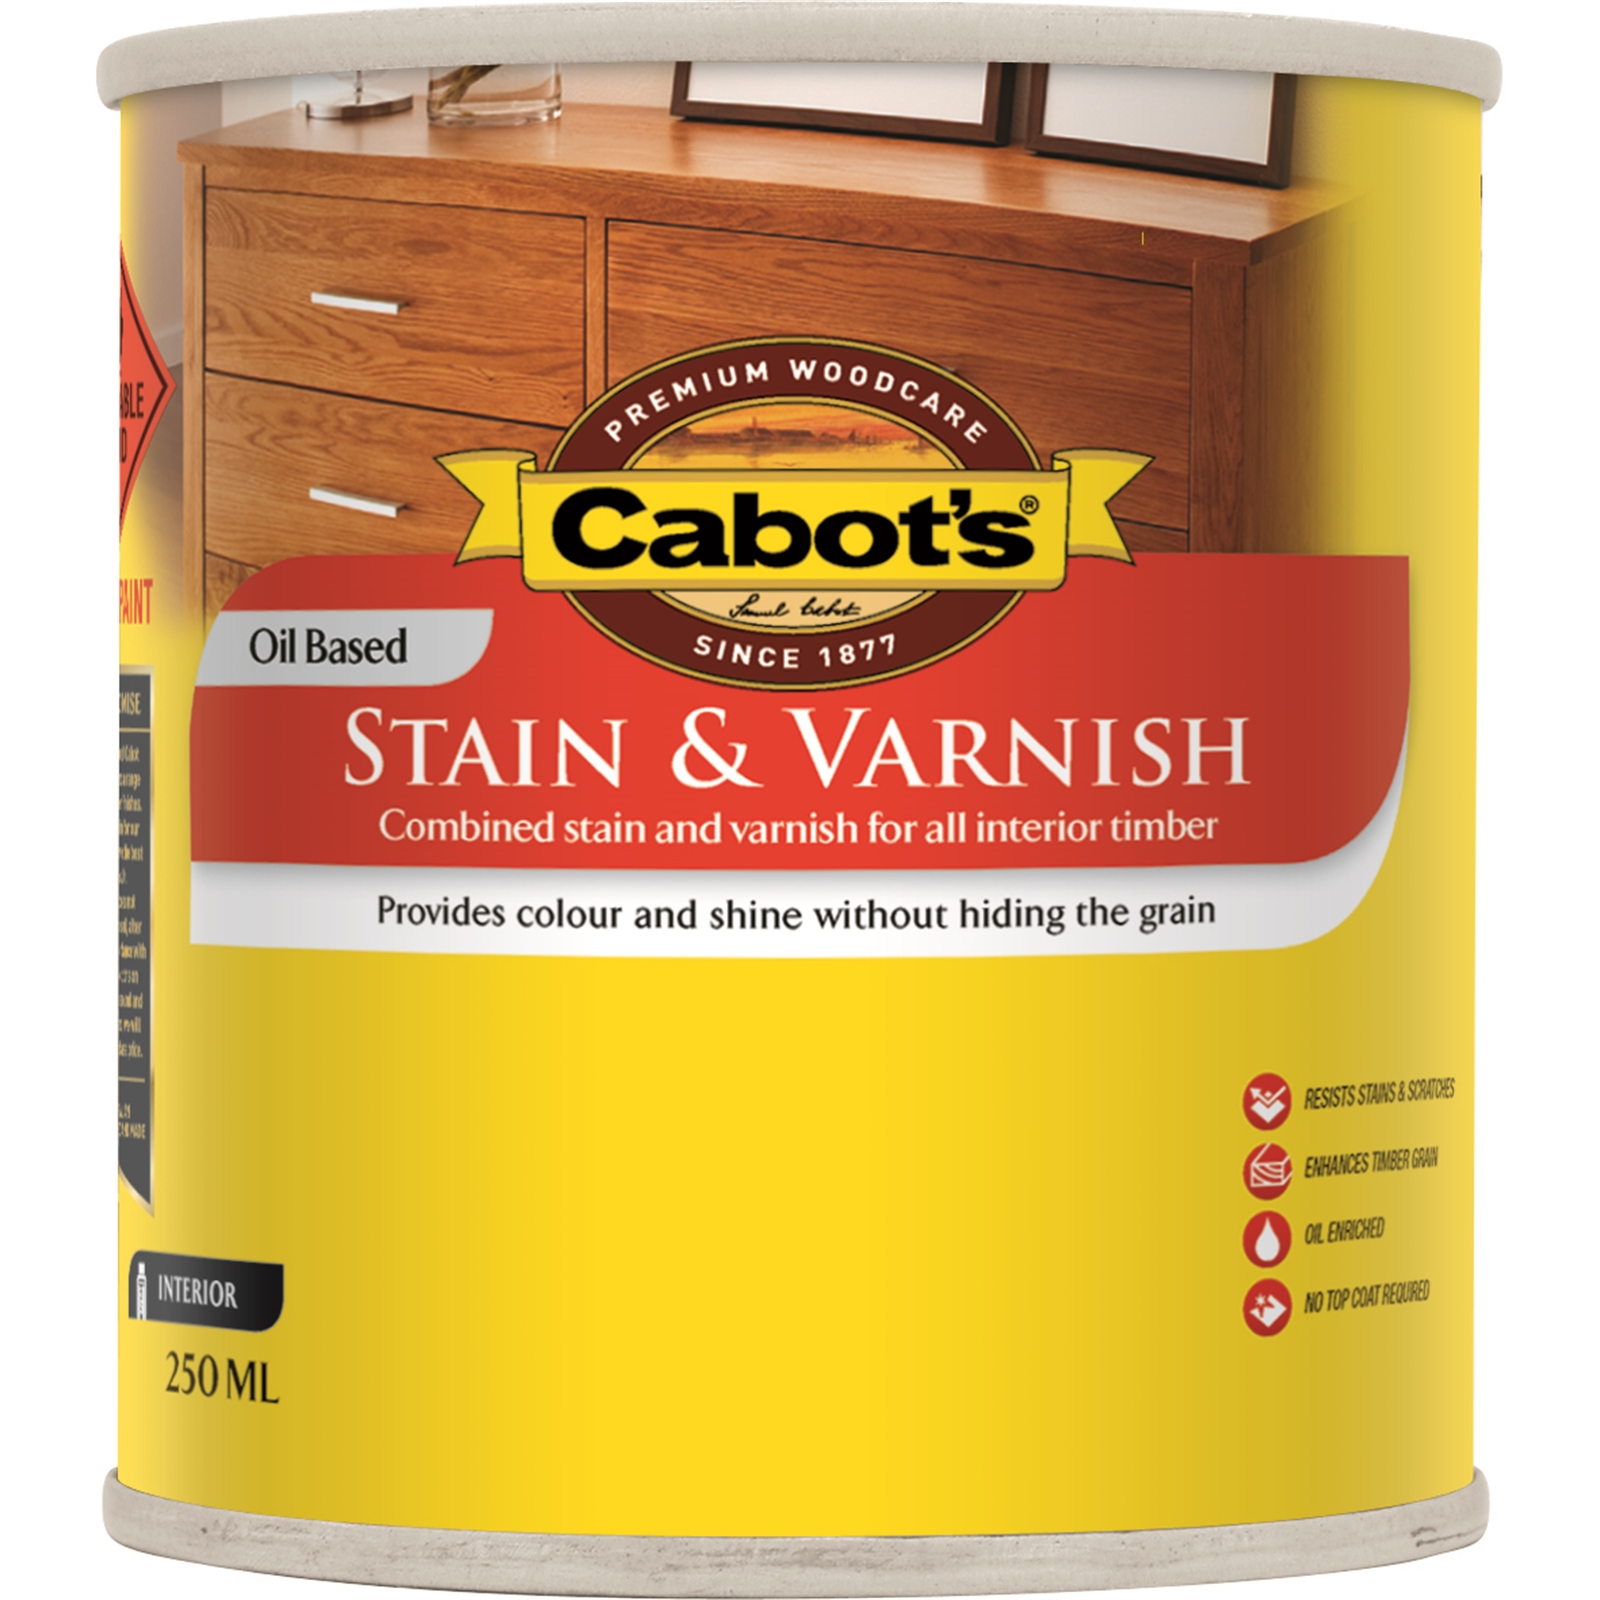 Cabots 250ml Satin Oil Based Cedar Stain and Varnish